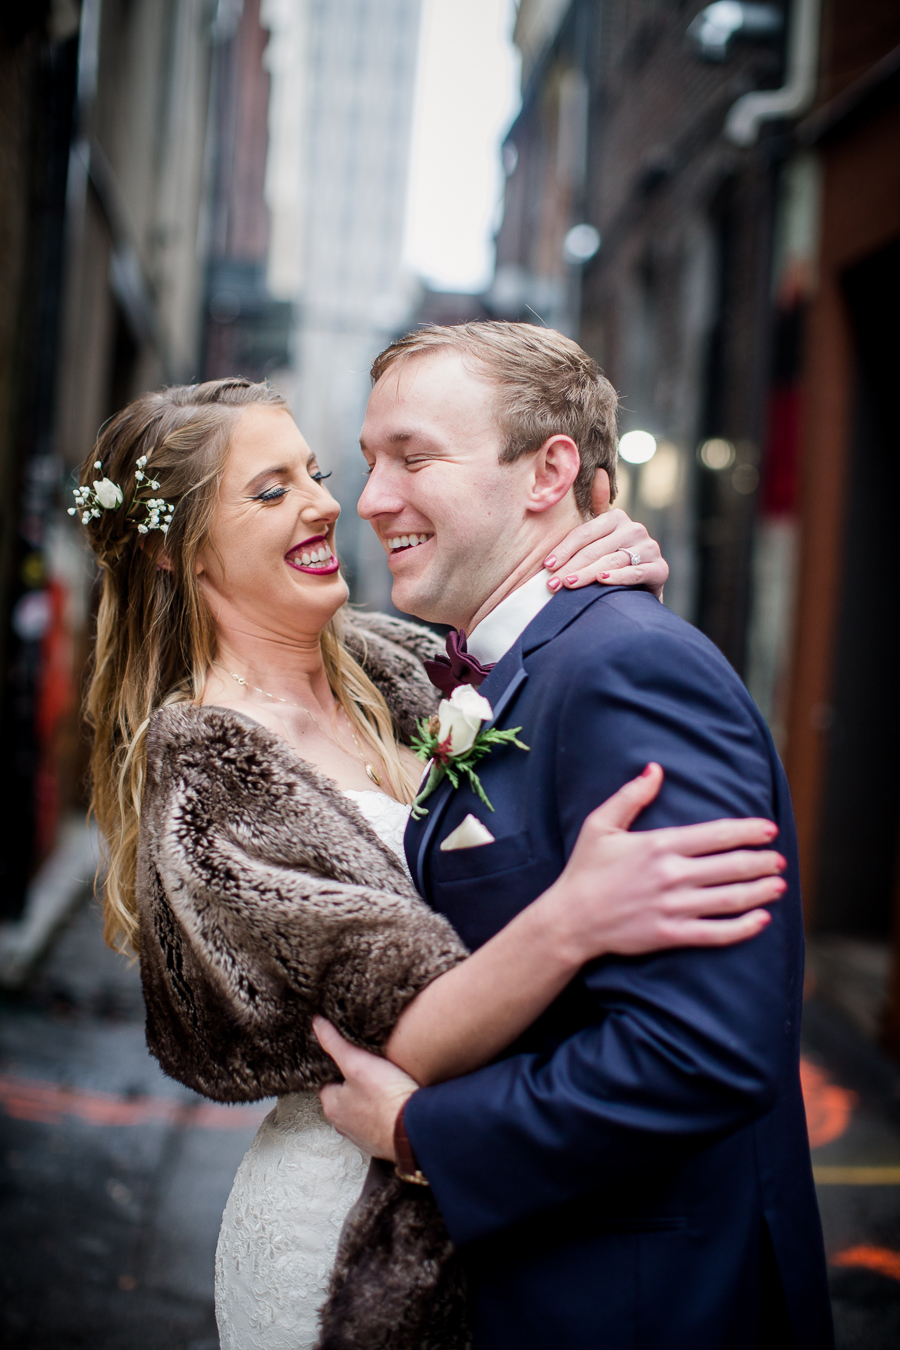 Laughing together in the art alley during the bride and groom romantic portraits at this winter wedding at Knoxville Wedding Venue, Jackson Terminal, by Knoxville Wedding Photographer, Amanda May Photos.